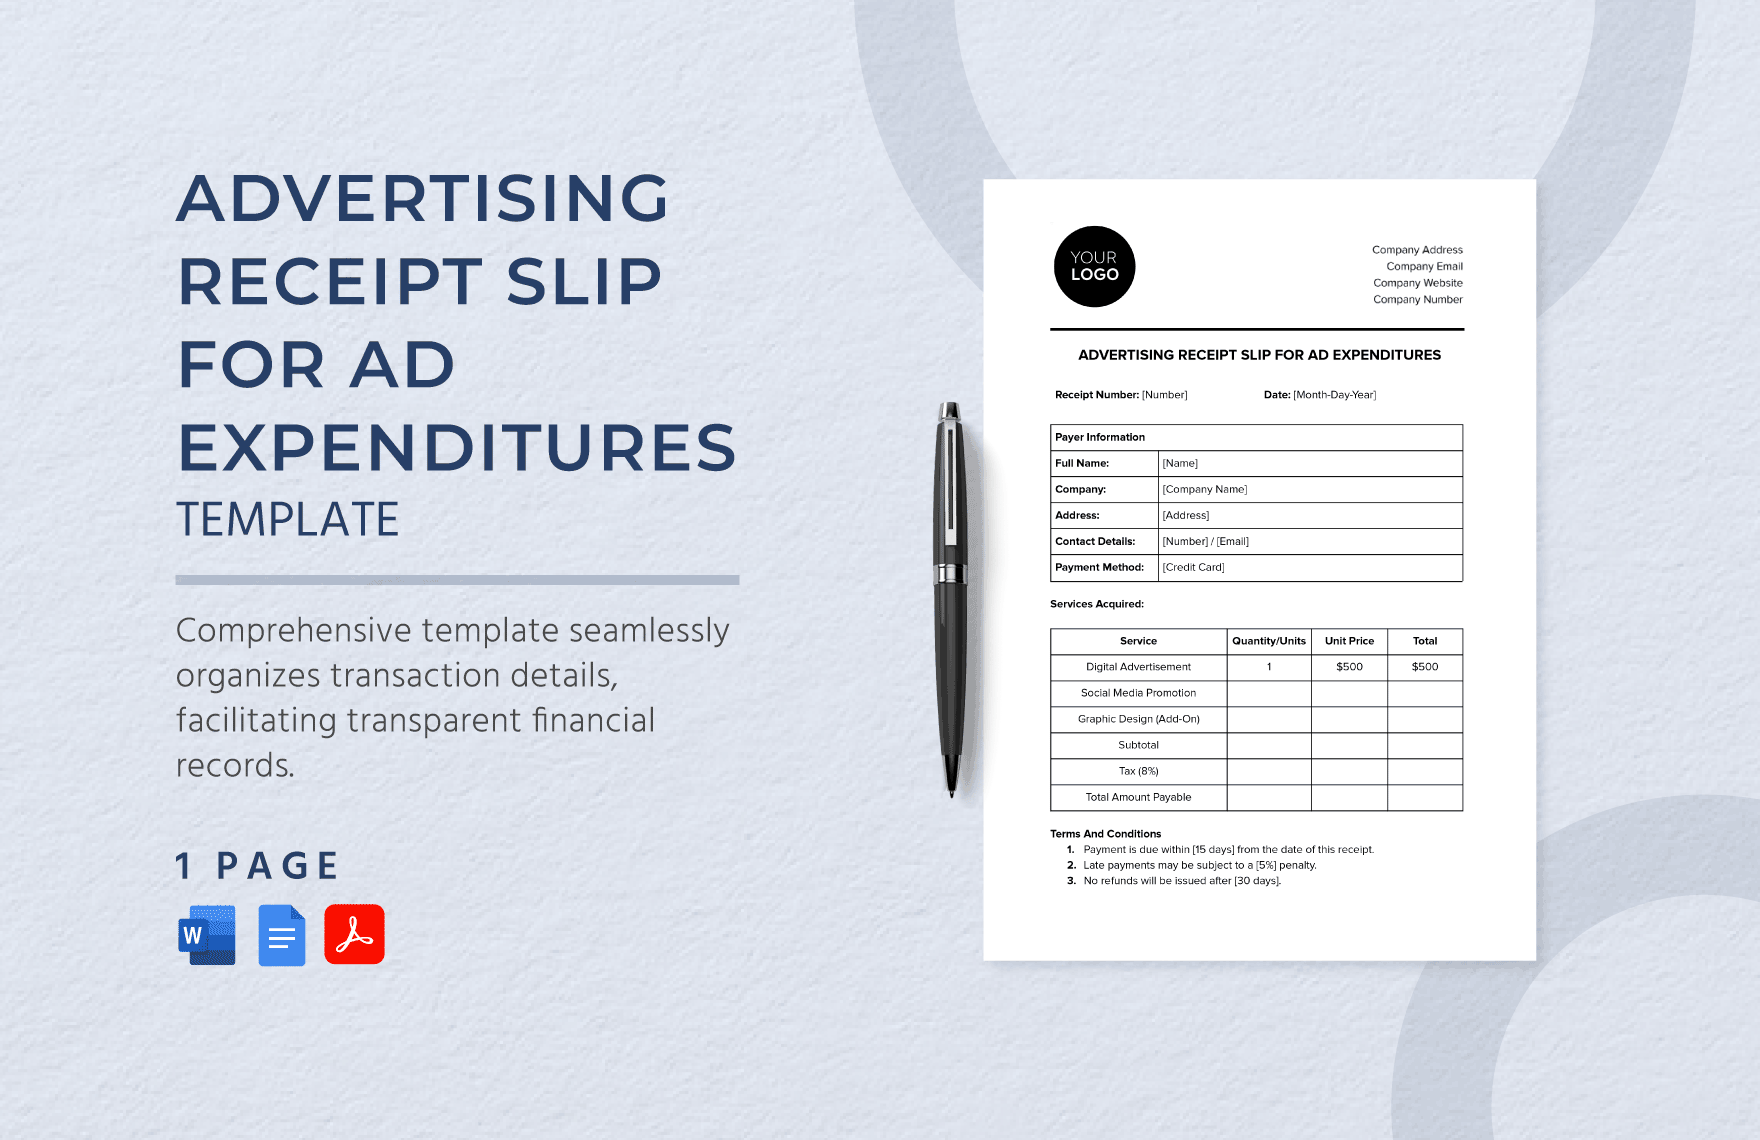 Advertising Receipt Slip for Ad Expenditures Template in Word, Google Docs, PDF